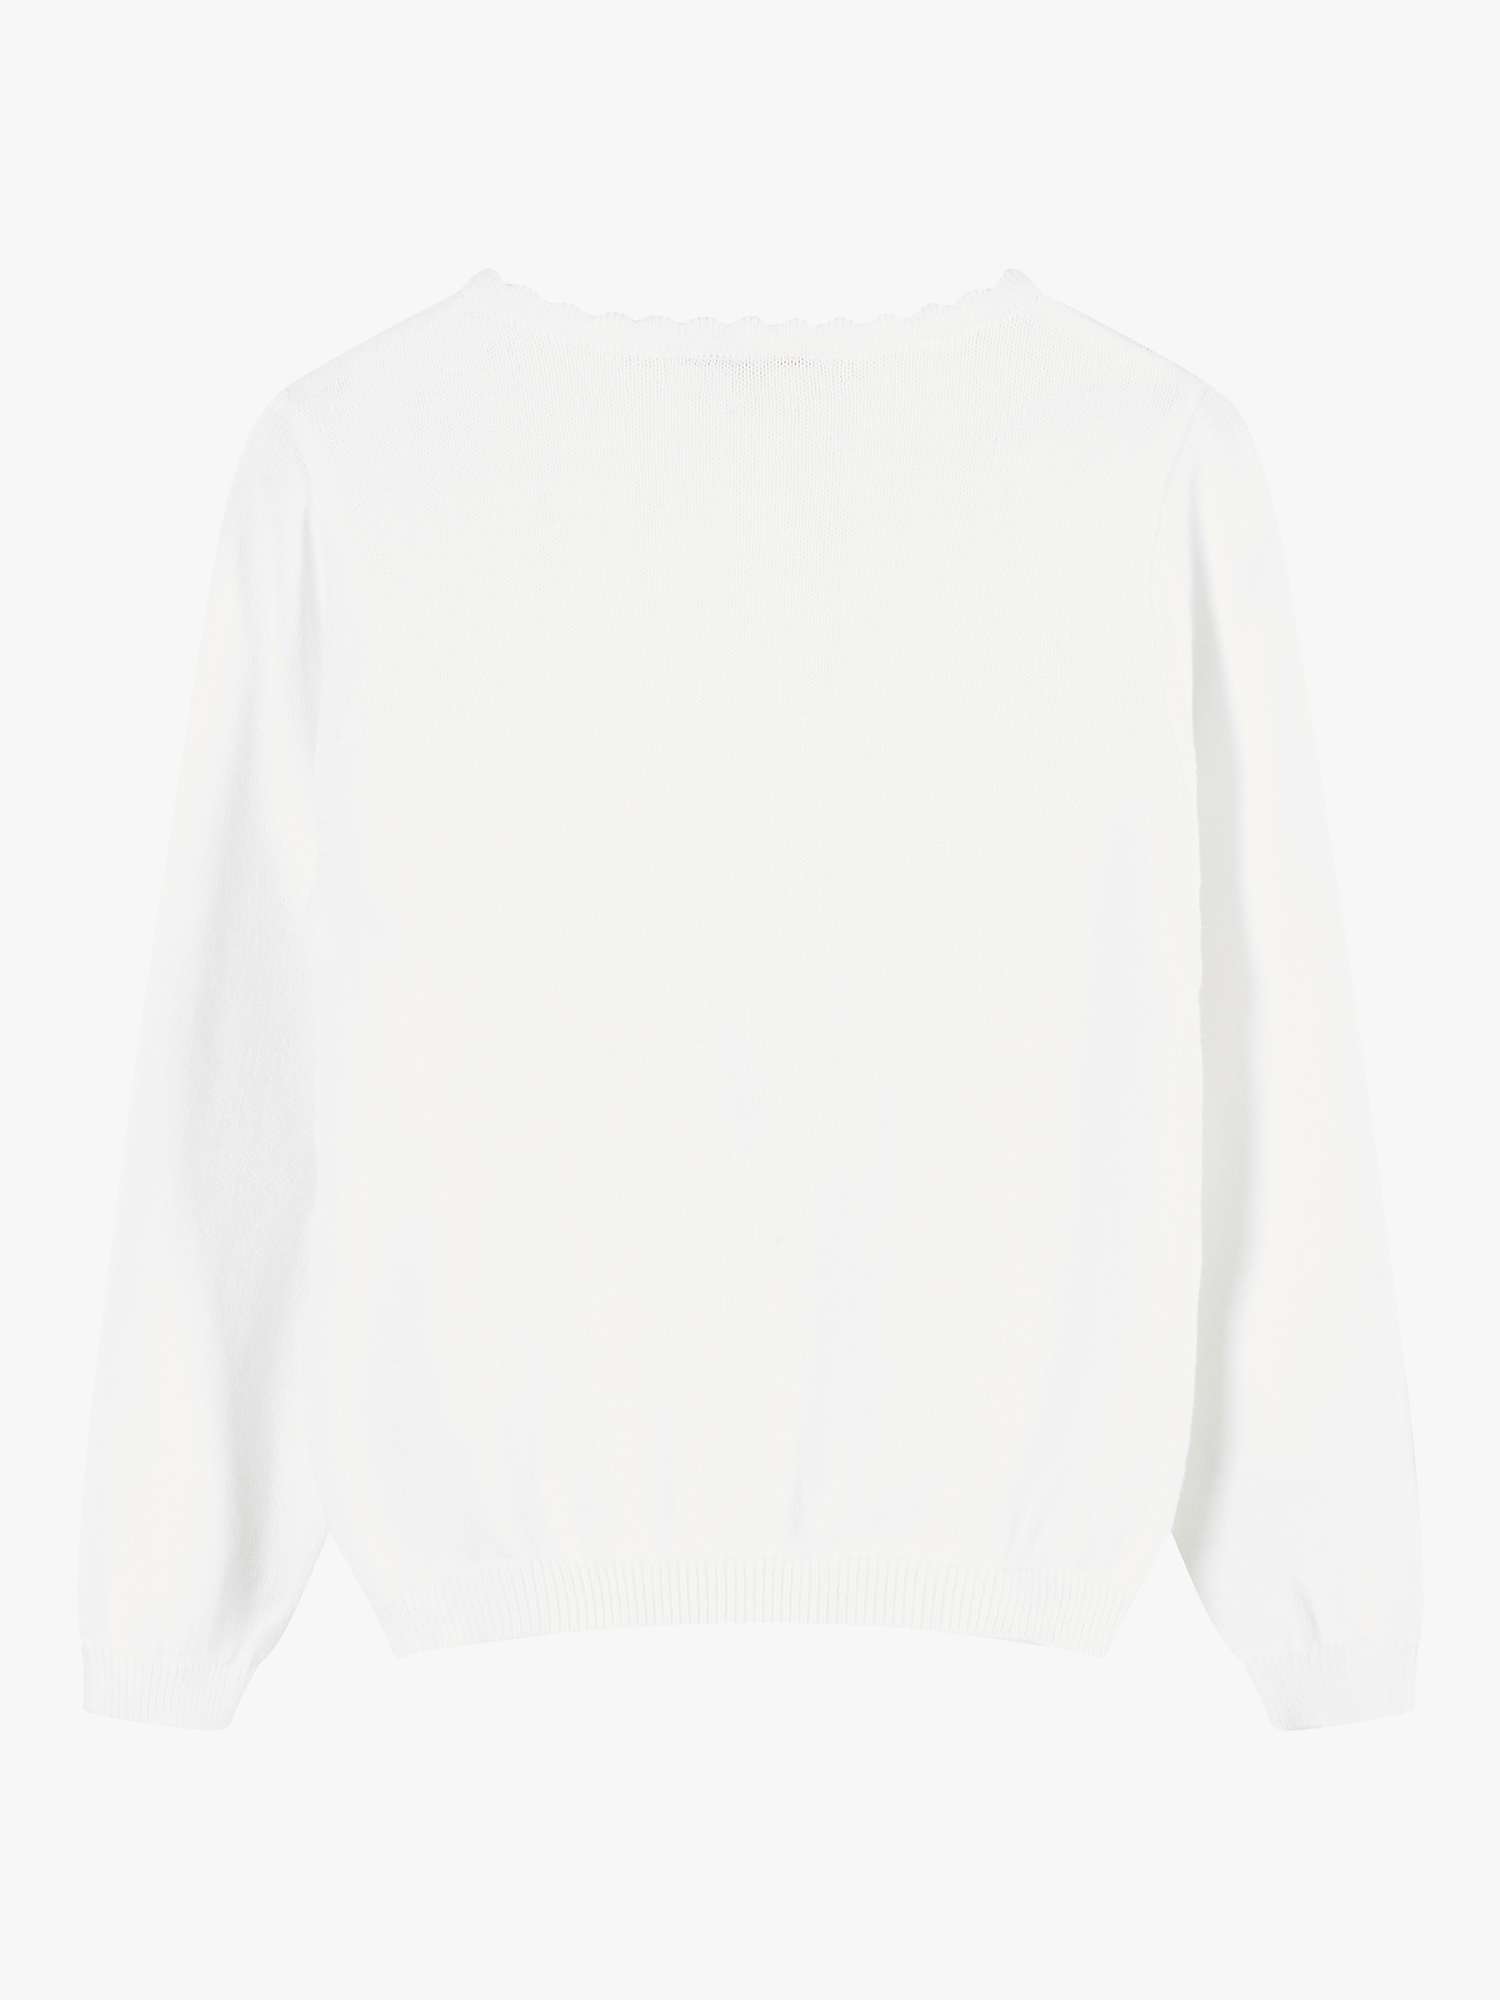 Buy Trotters Kids' Scalloped Edge Cardigan, White Online at johnlewis.com